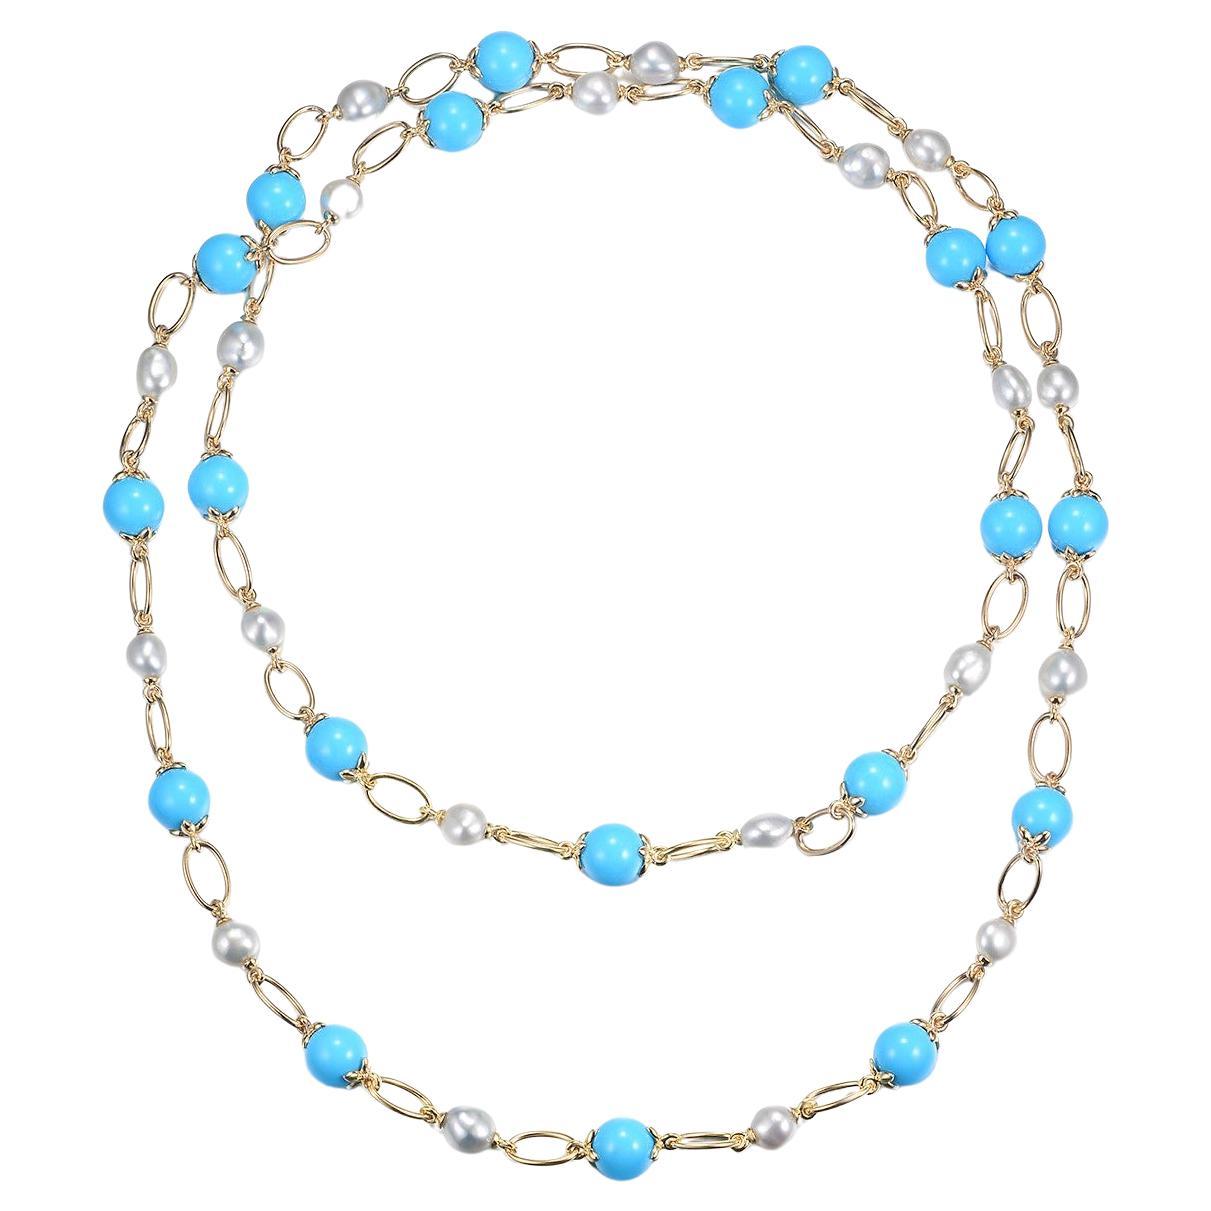 Turquoise South Sea Pearl Necklace in 14 Karat Yellow Gold